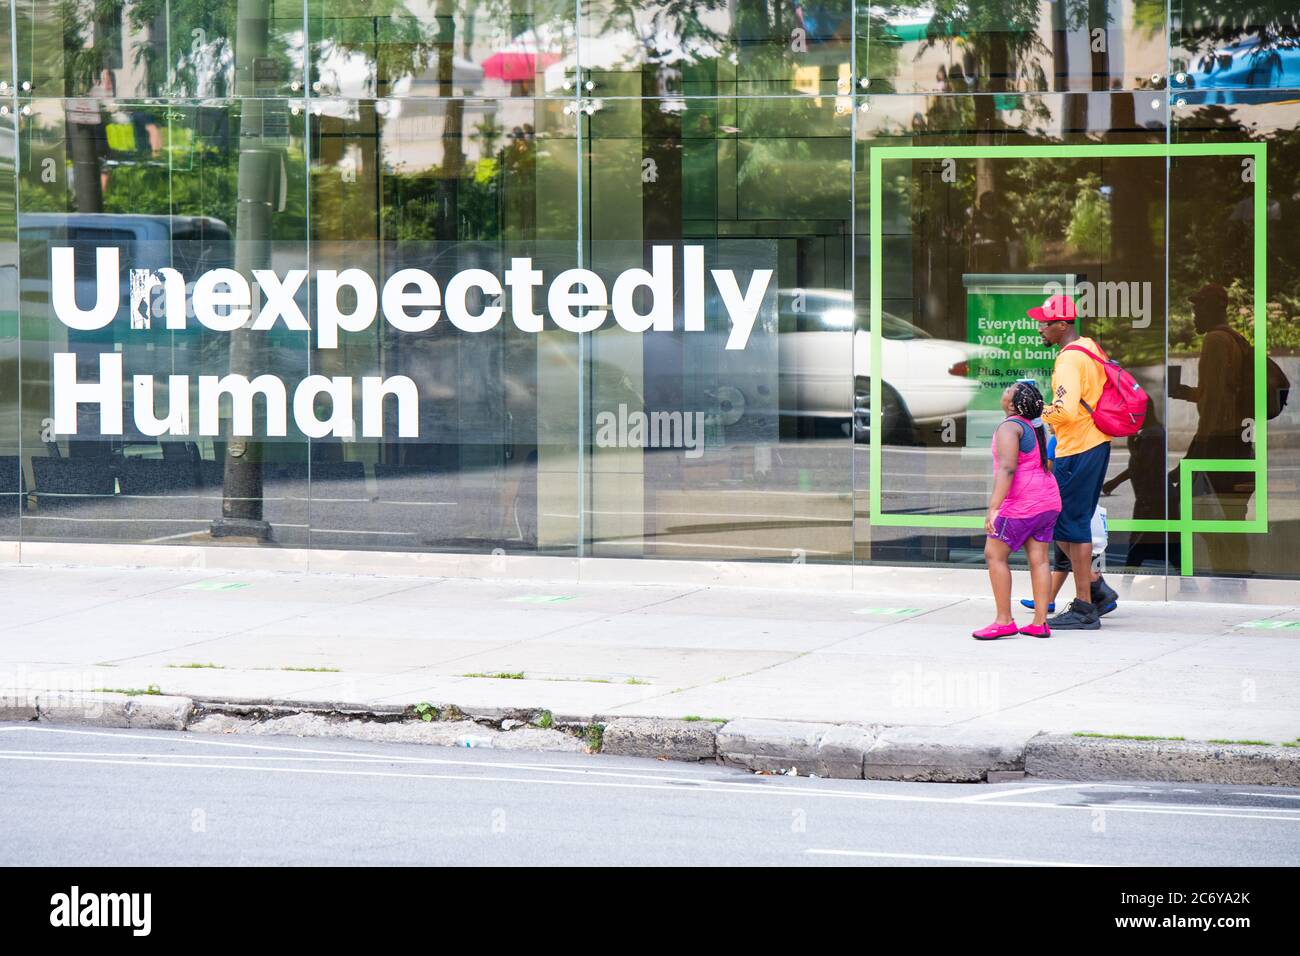 Philadelphia / USA. A man and a young girl walk past a sign that says, Unexpectedly Human. July 12, 2020. Credit: Christopher Evens / Alamy Live News Stock Photo